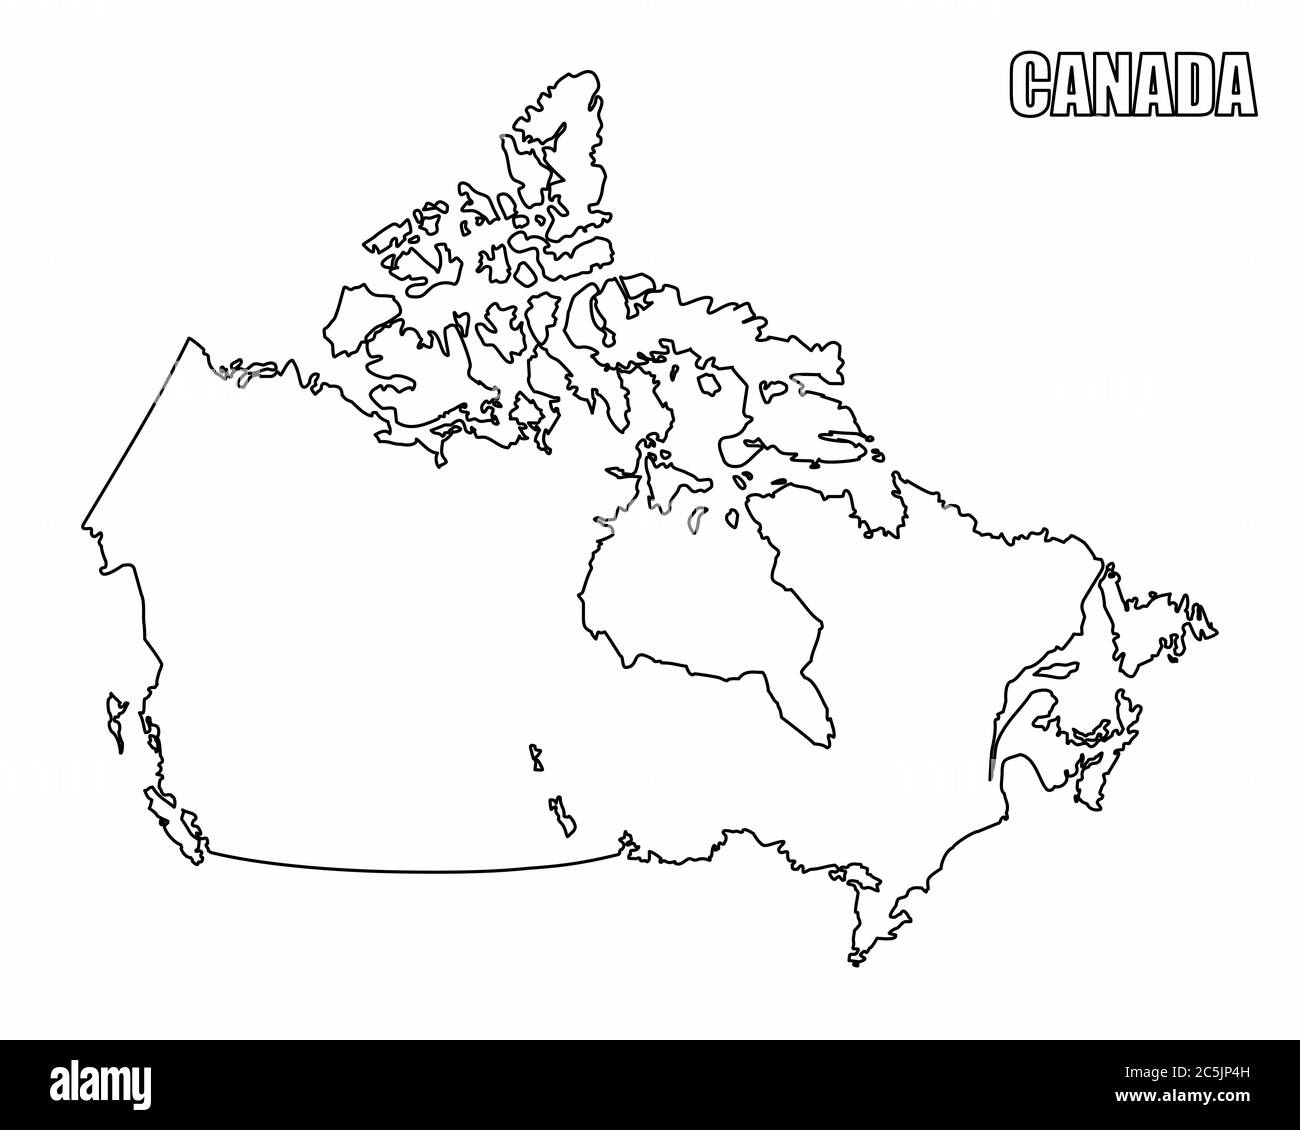 Canada outline map Stock Vector